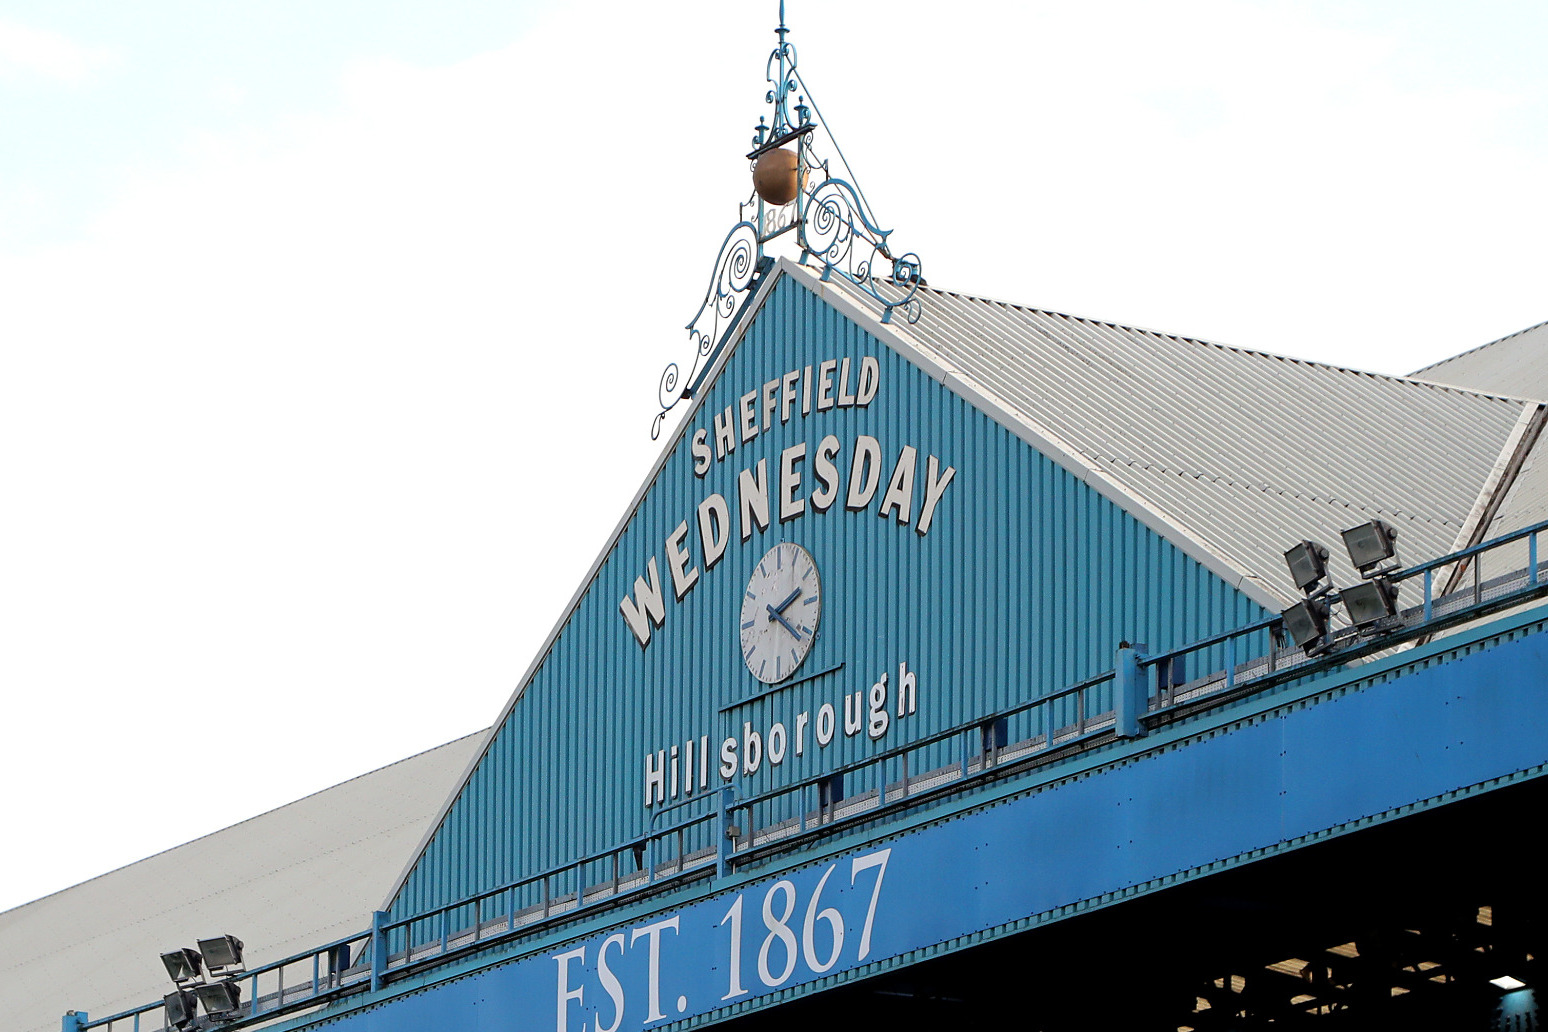 Capacity in Hillsborough’s Leppings Lane End reduced 